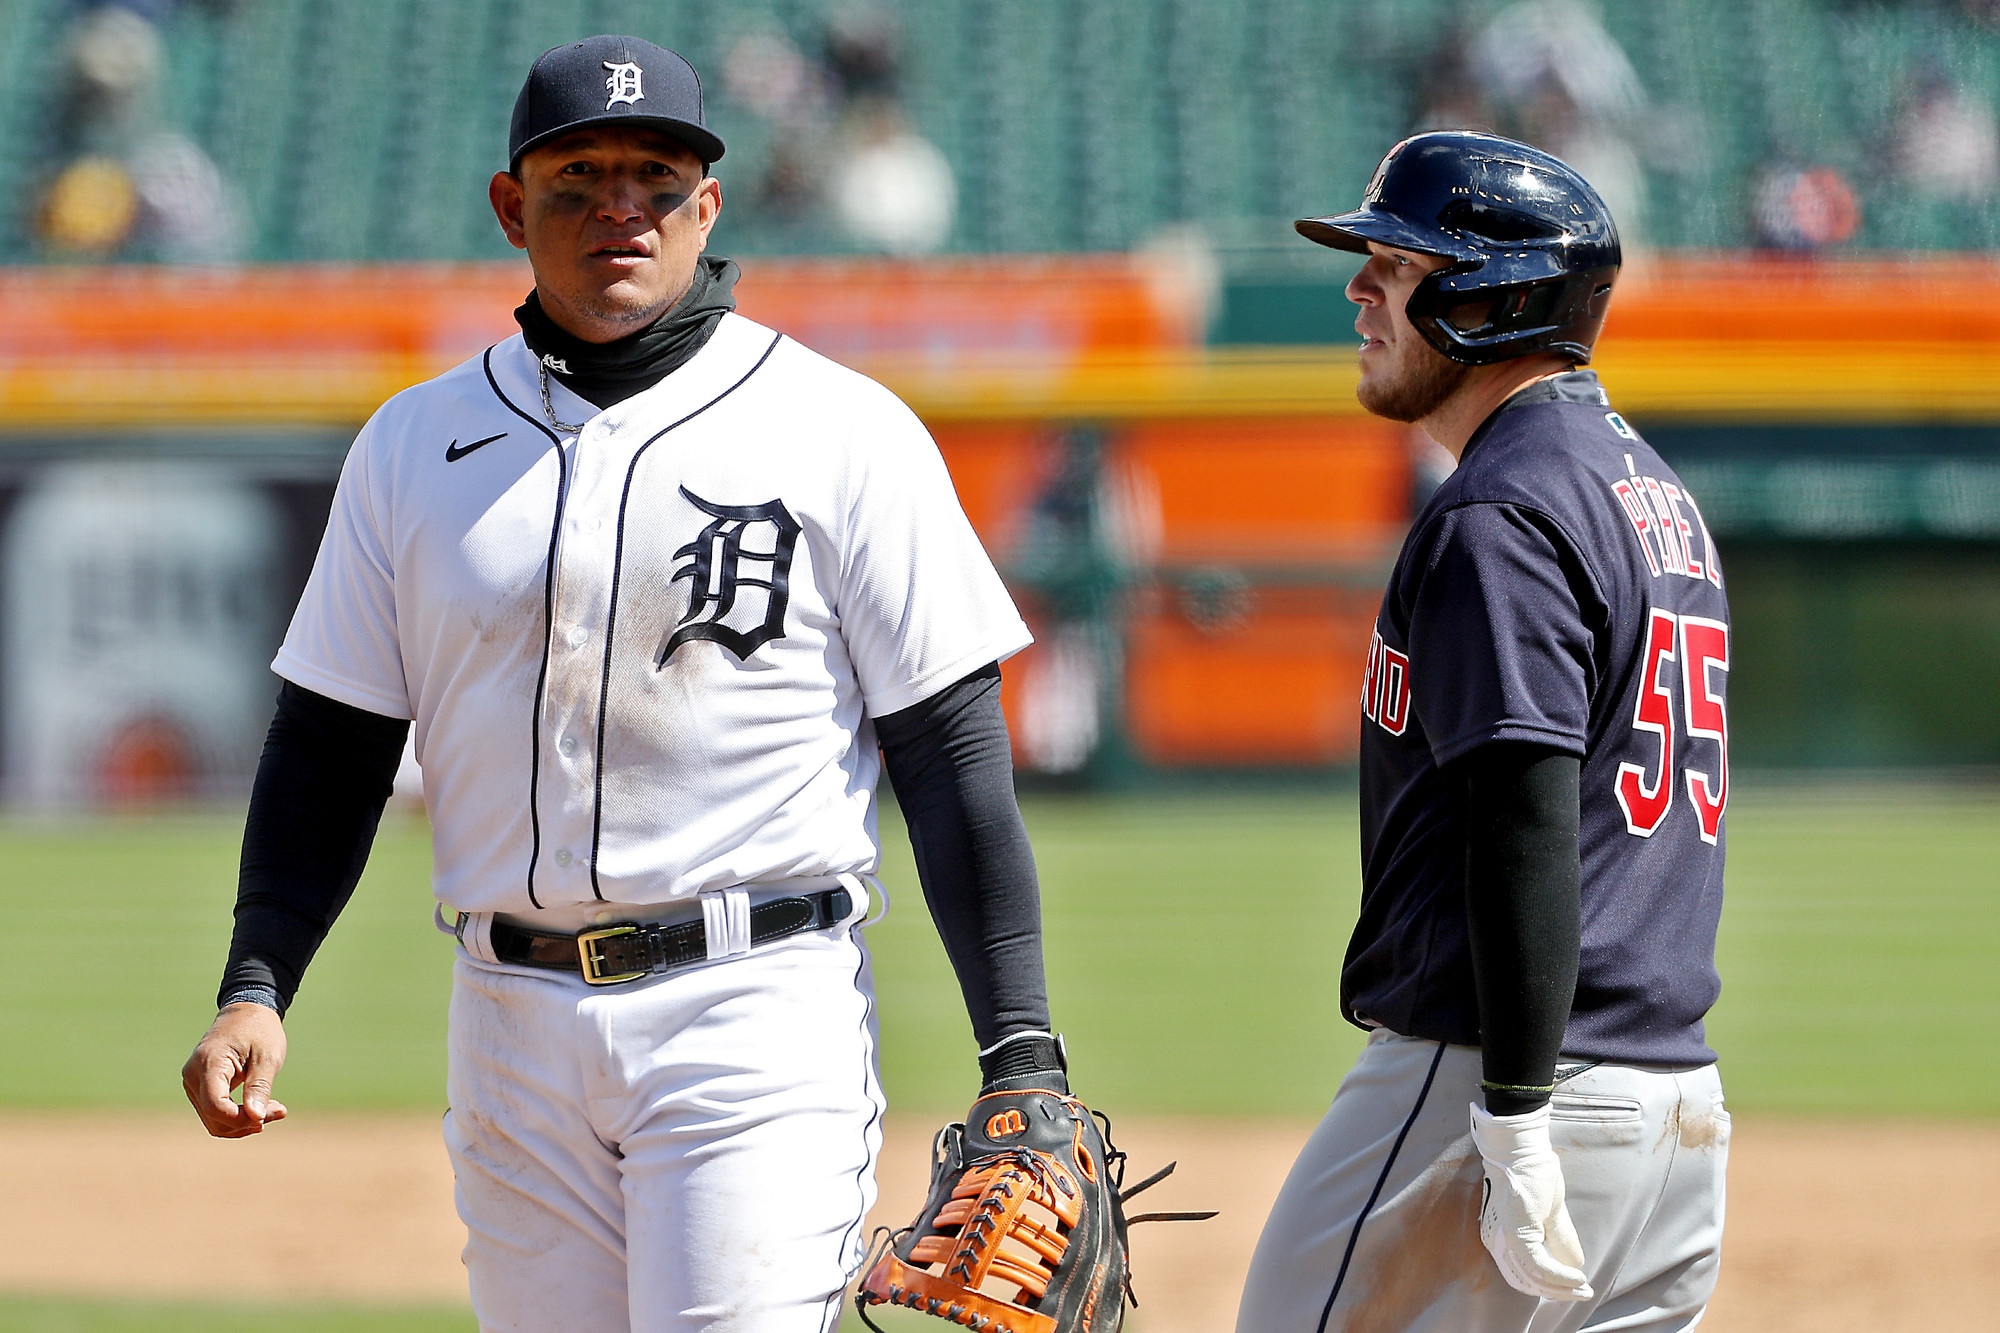 Miguel Cabrera's magic shines through in Detroit Tigers' home opener